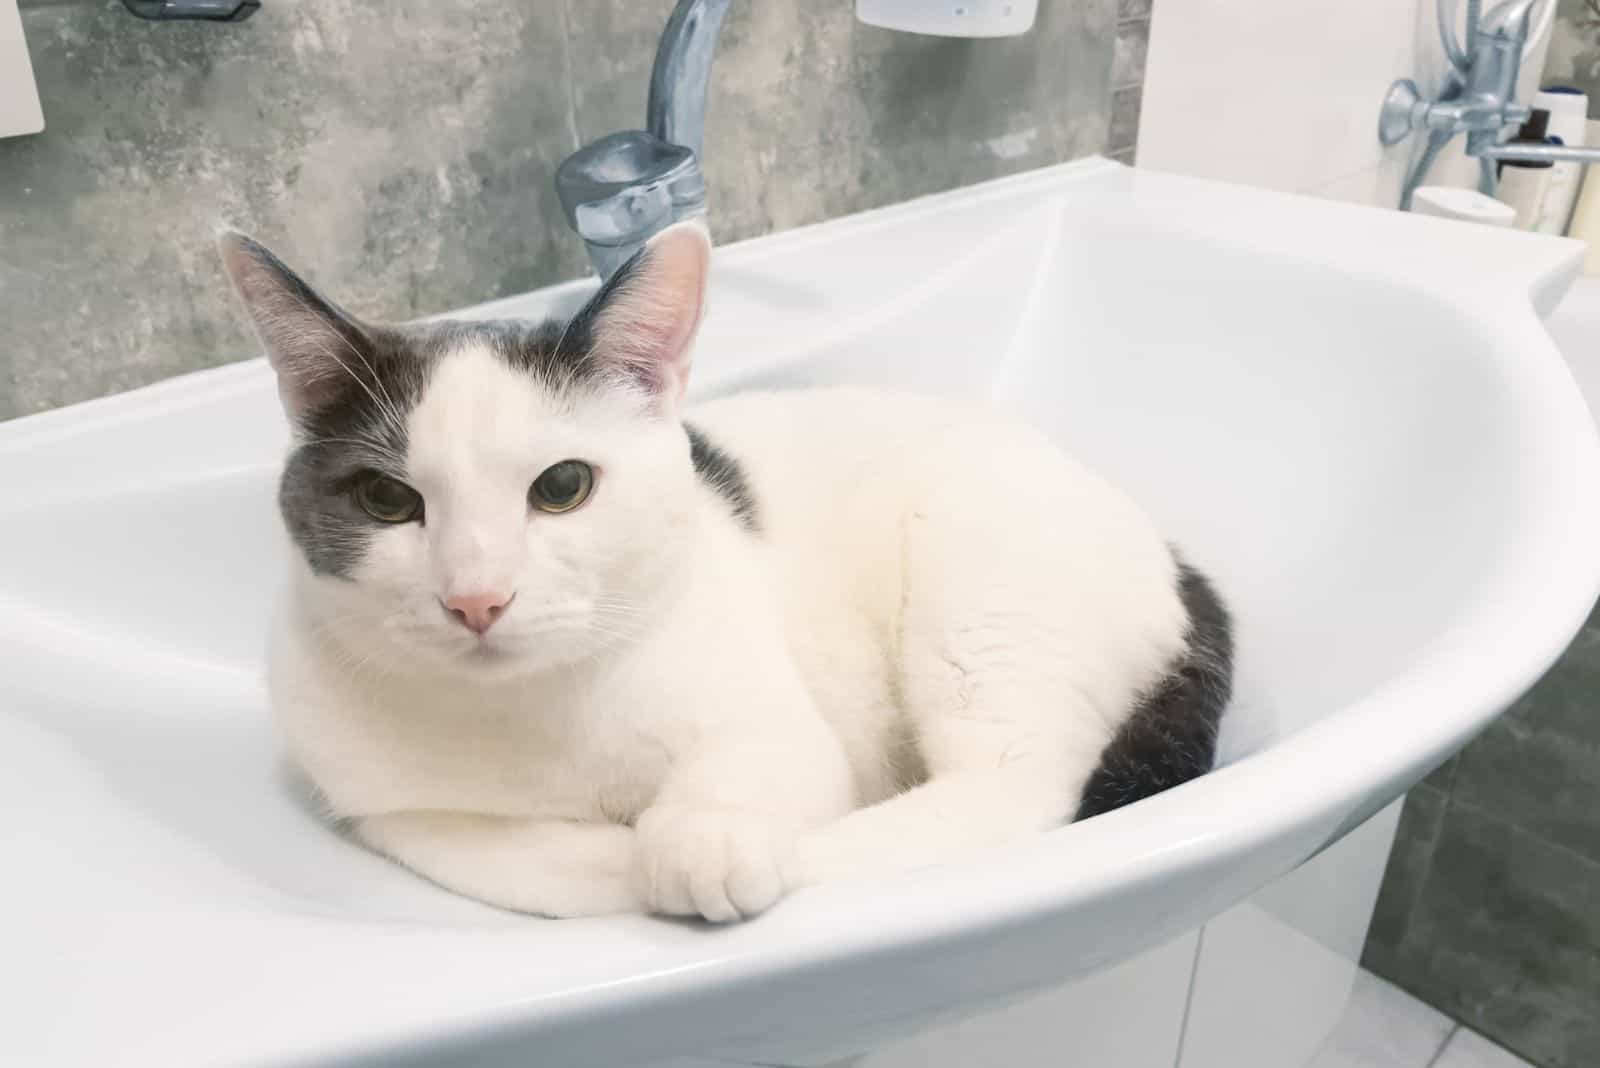 the cat is sitting in the sink